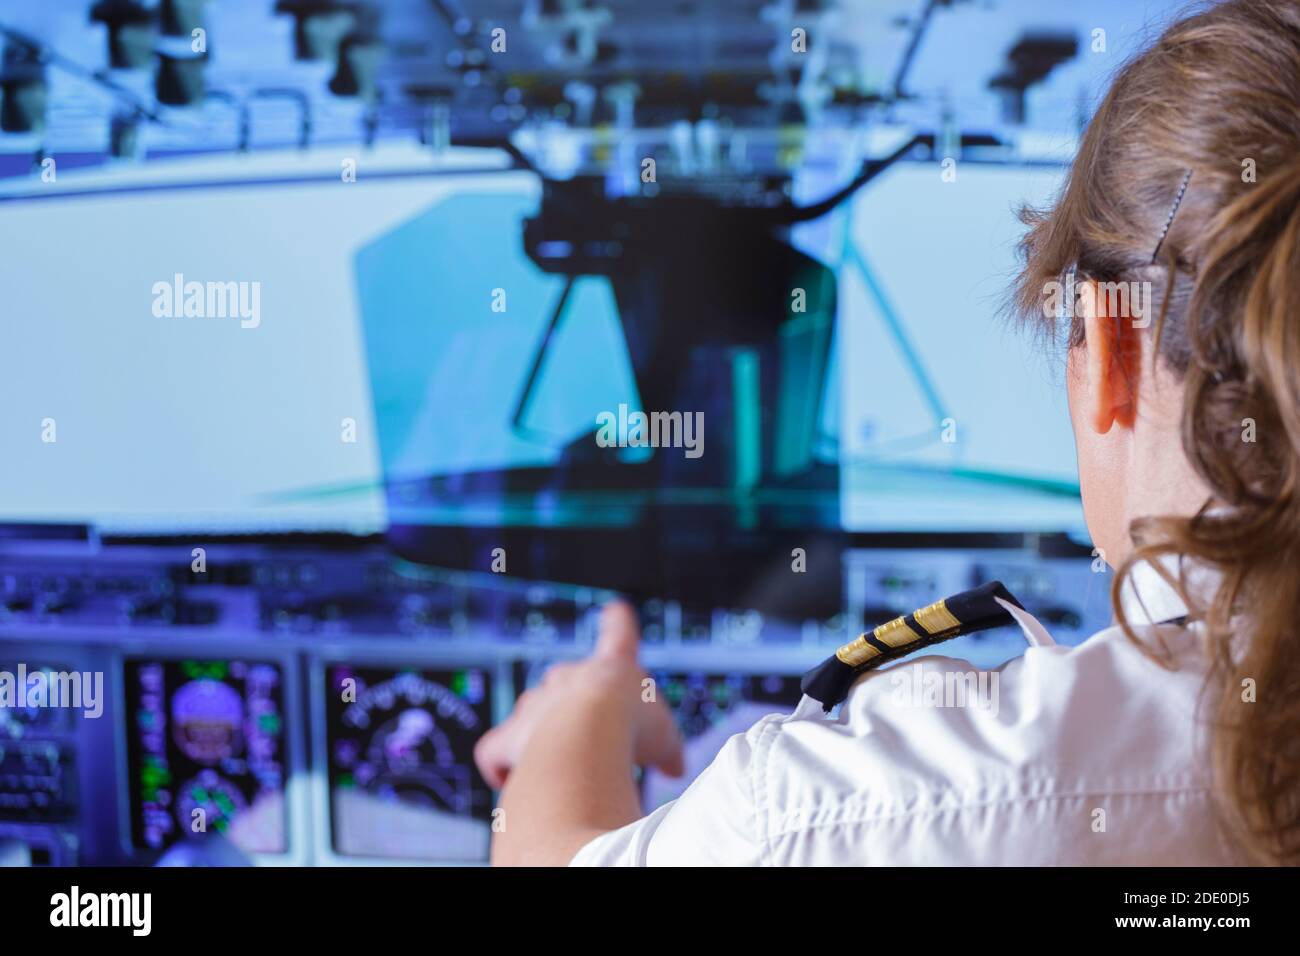 Beautiful woman pilot wearing uniform with epauletes changes the autopilot settings in the cockpit of a flying airplane Stock Photo